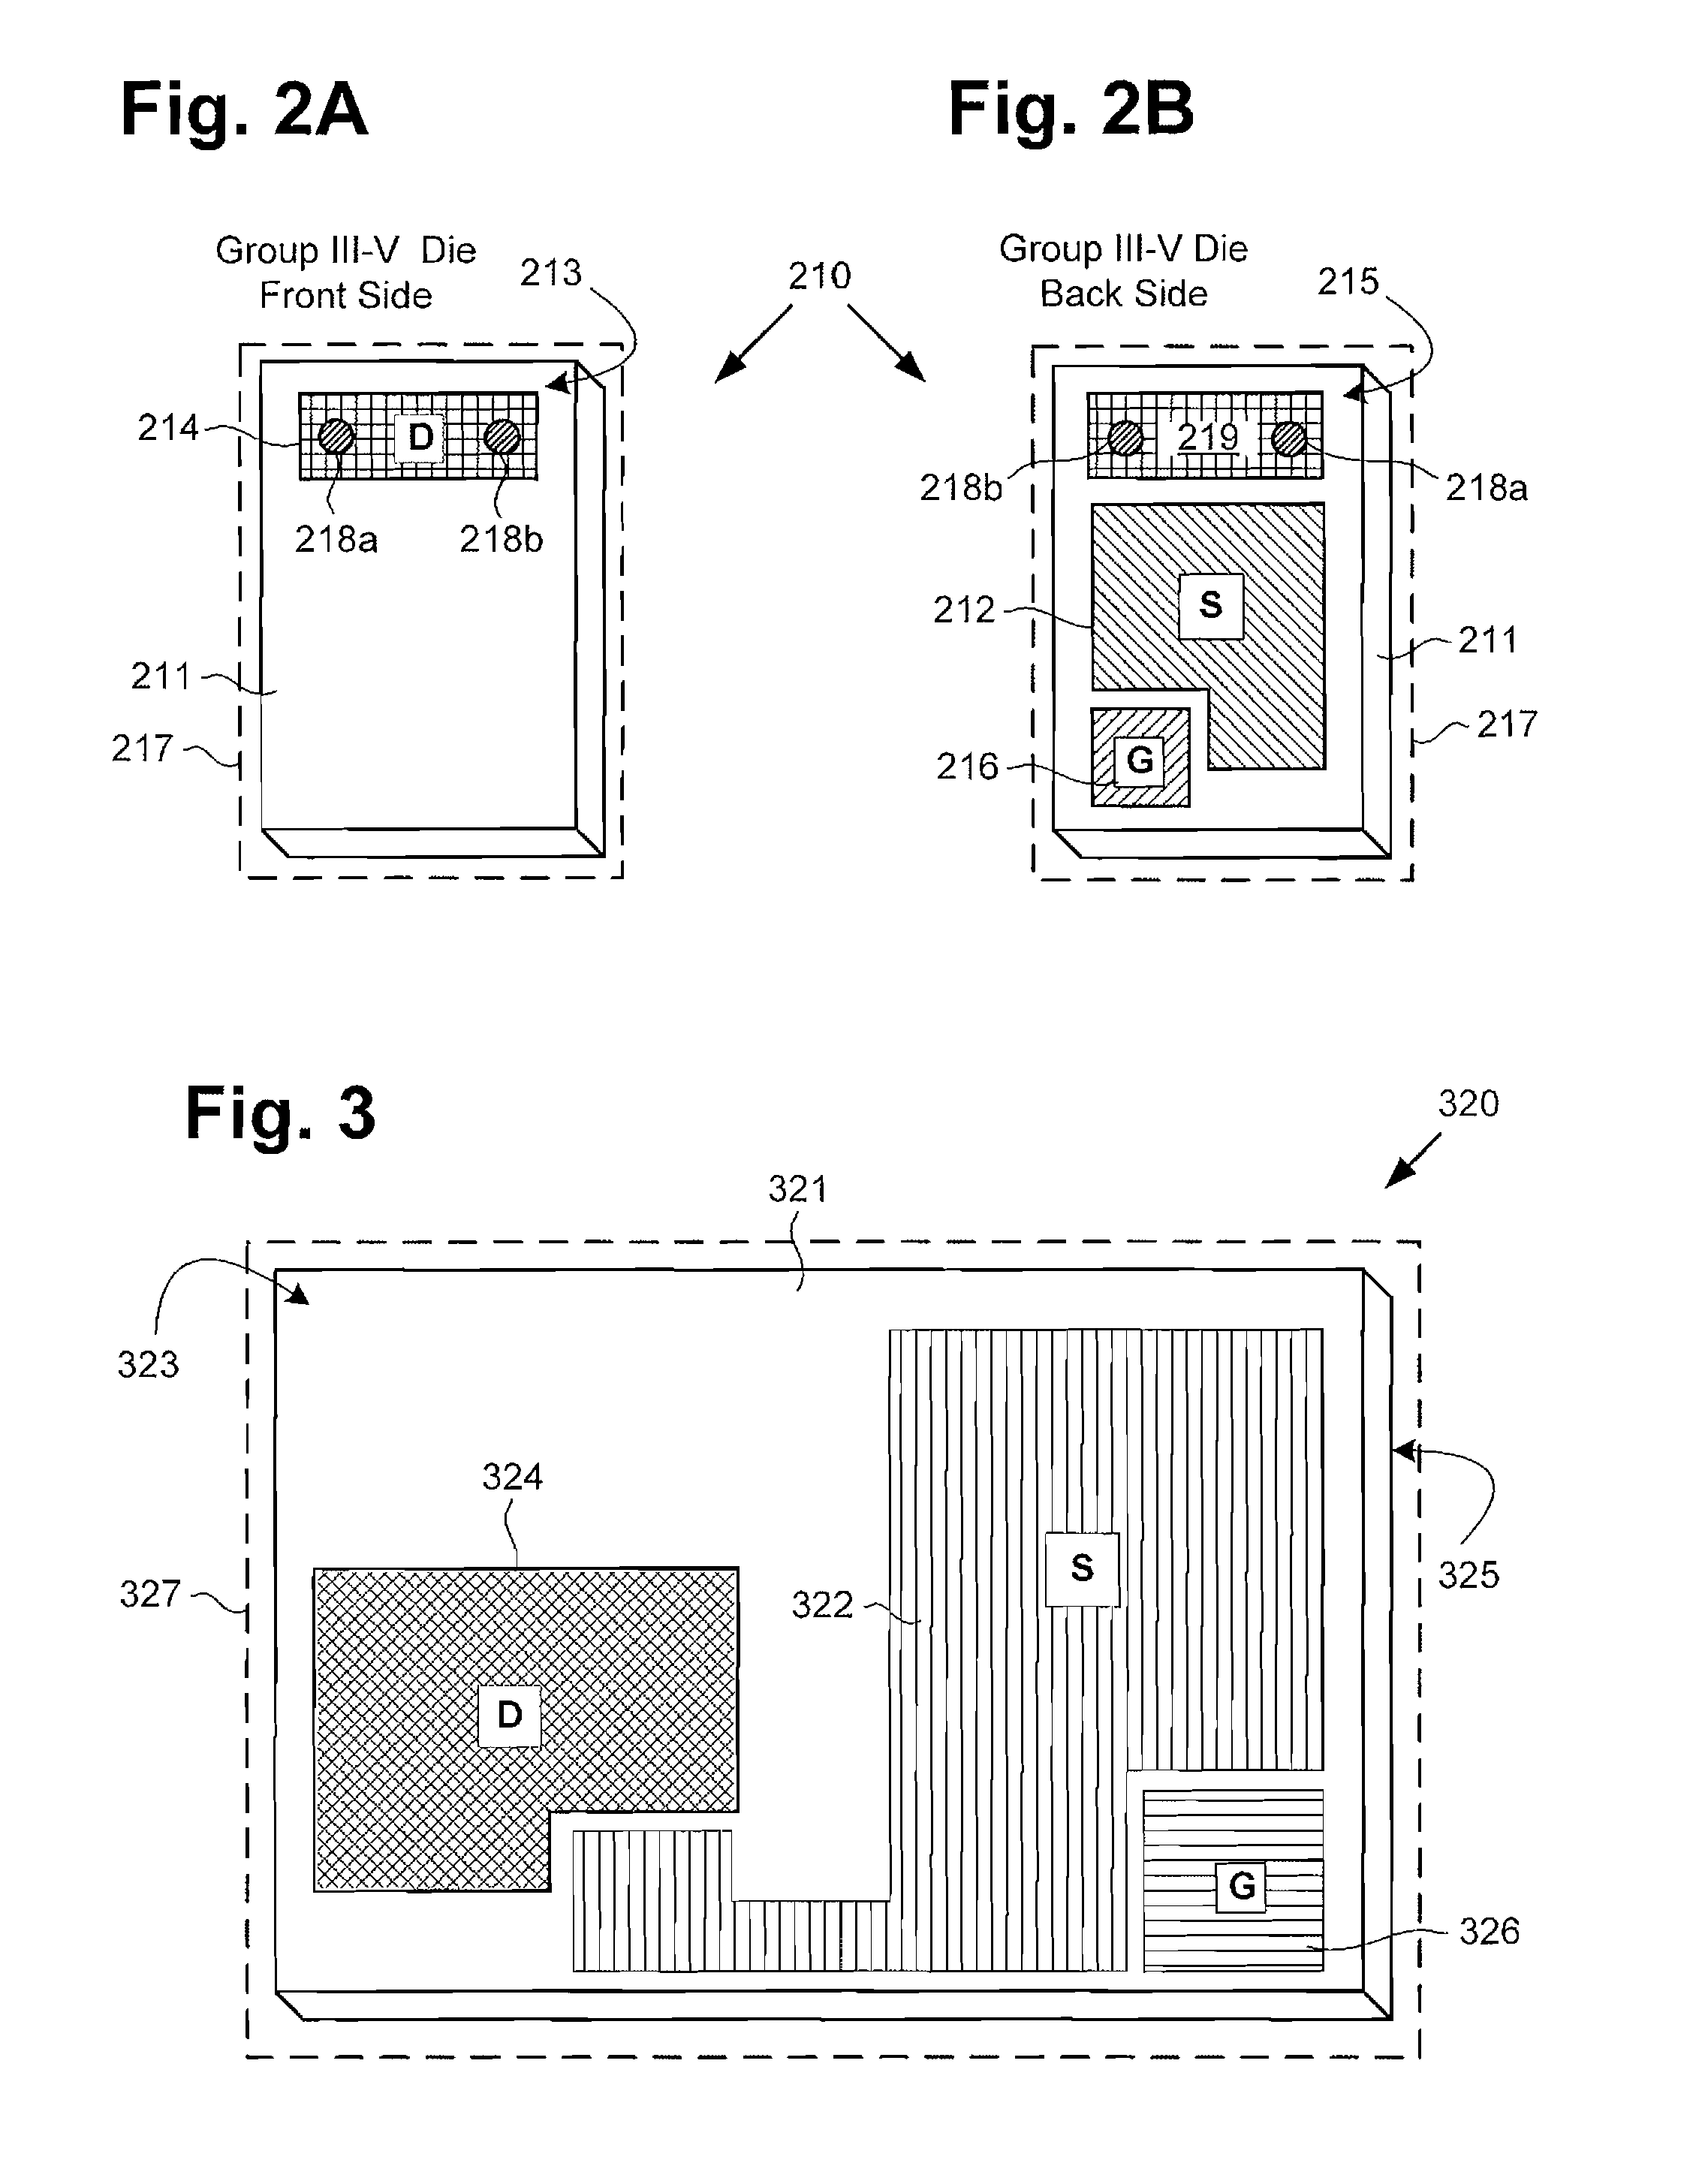 Stacked Composite Device Including a Group III-V Transistor and a Group IV Lateral Transistor